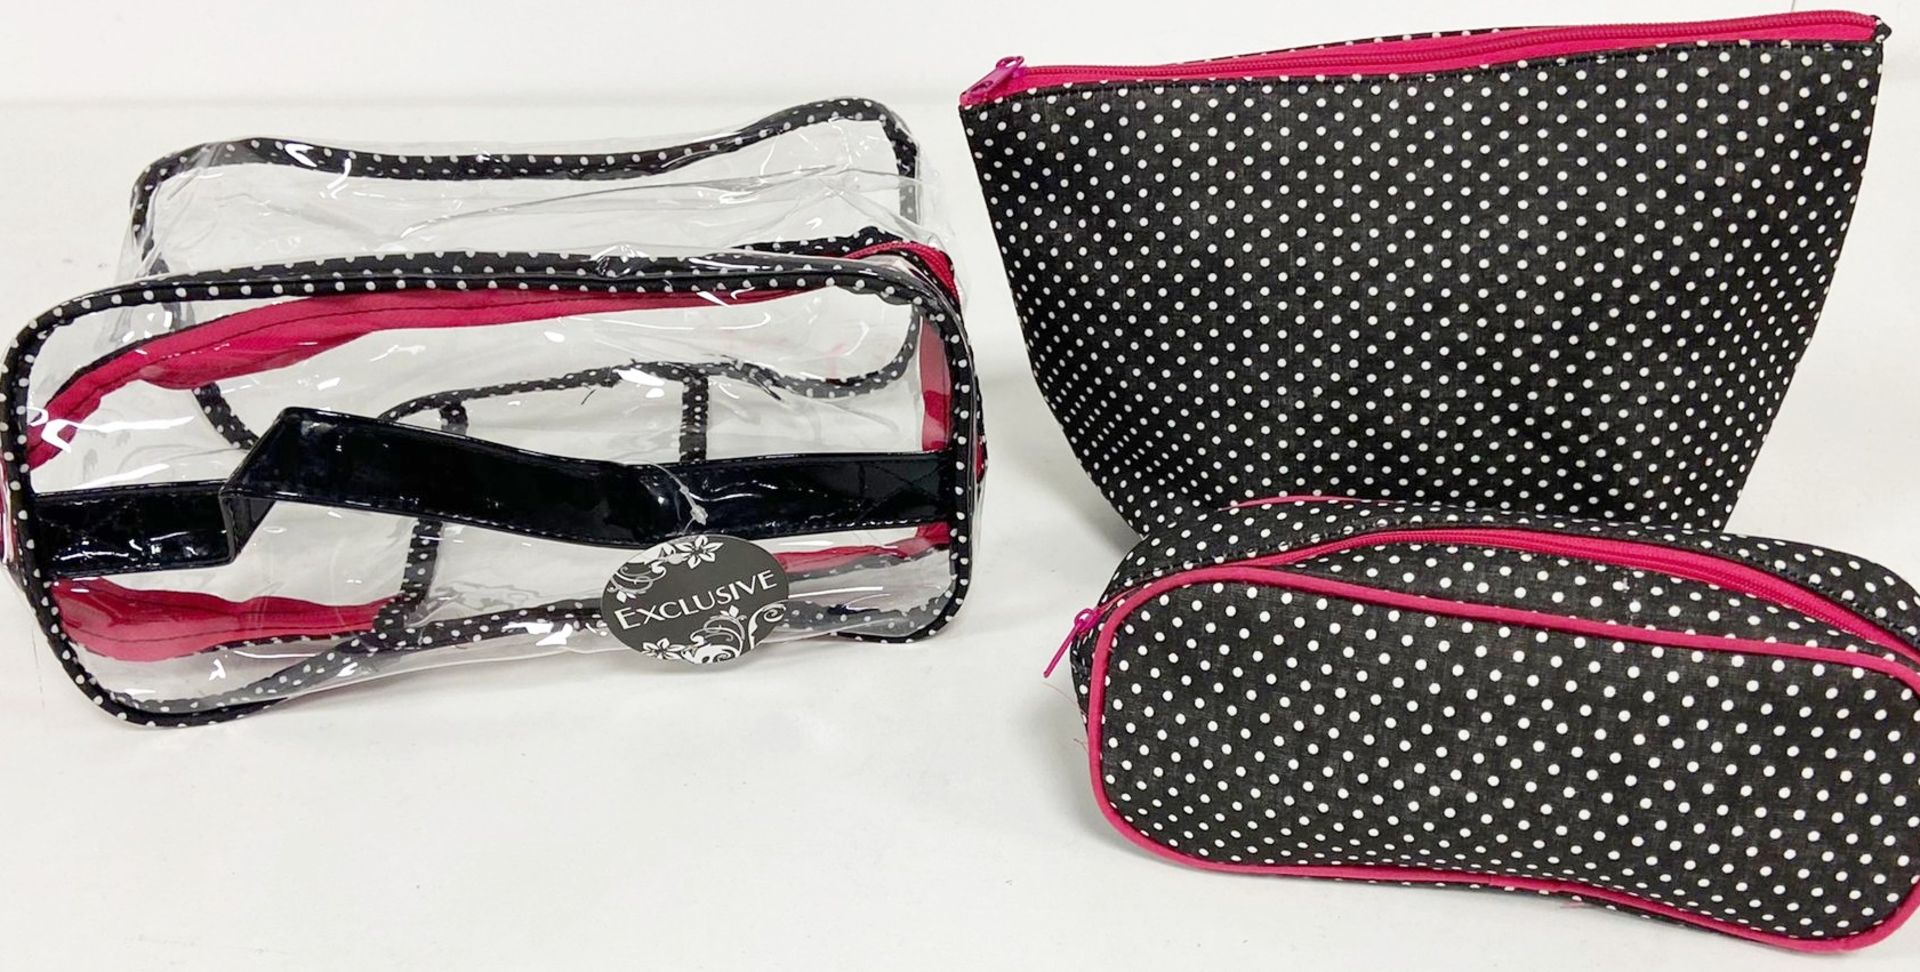 8 x EXCLUSIVE 3 in 1 Polka-Dot Make-Up Carrying Cases - Image 4 of 4